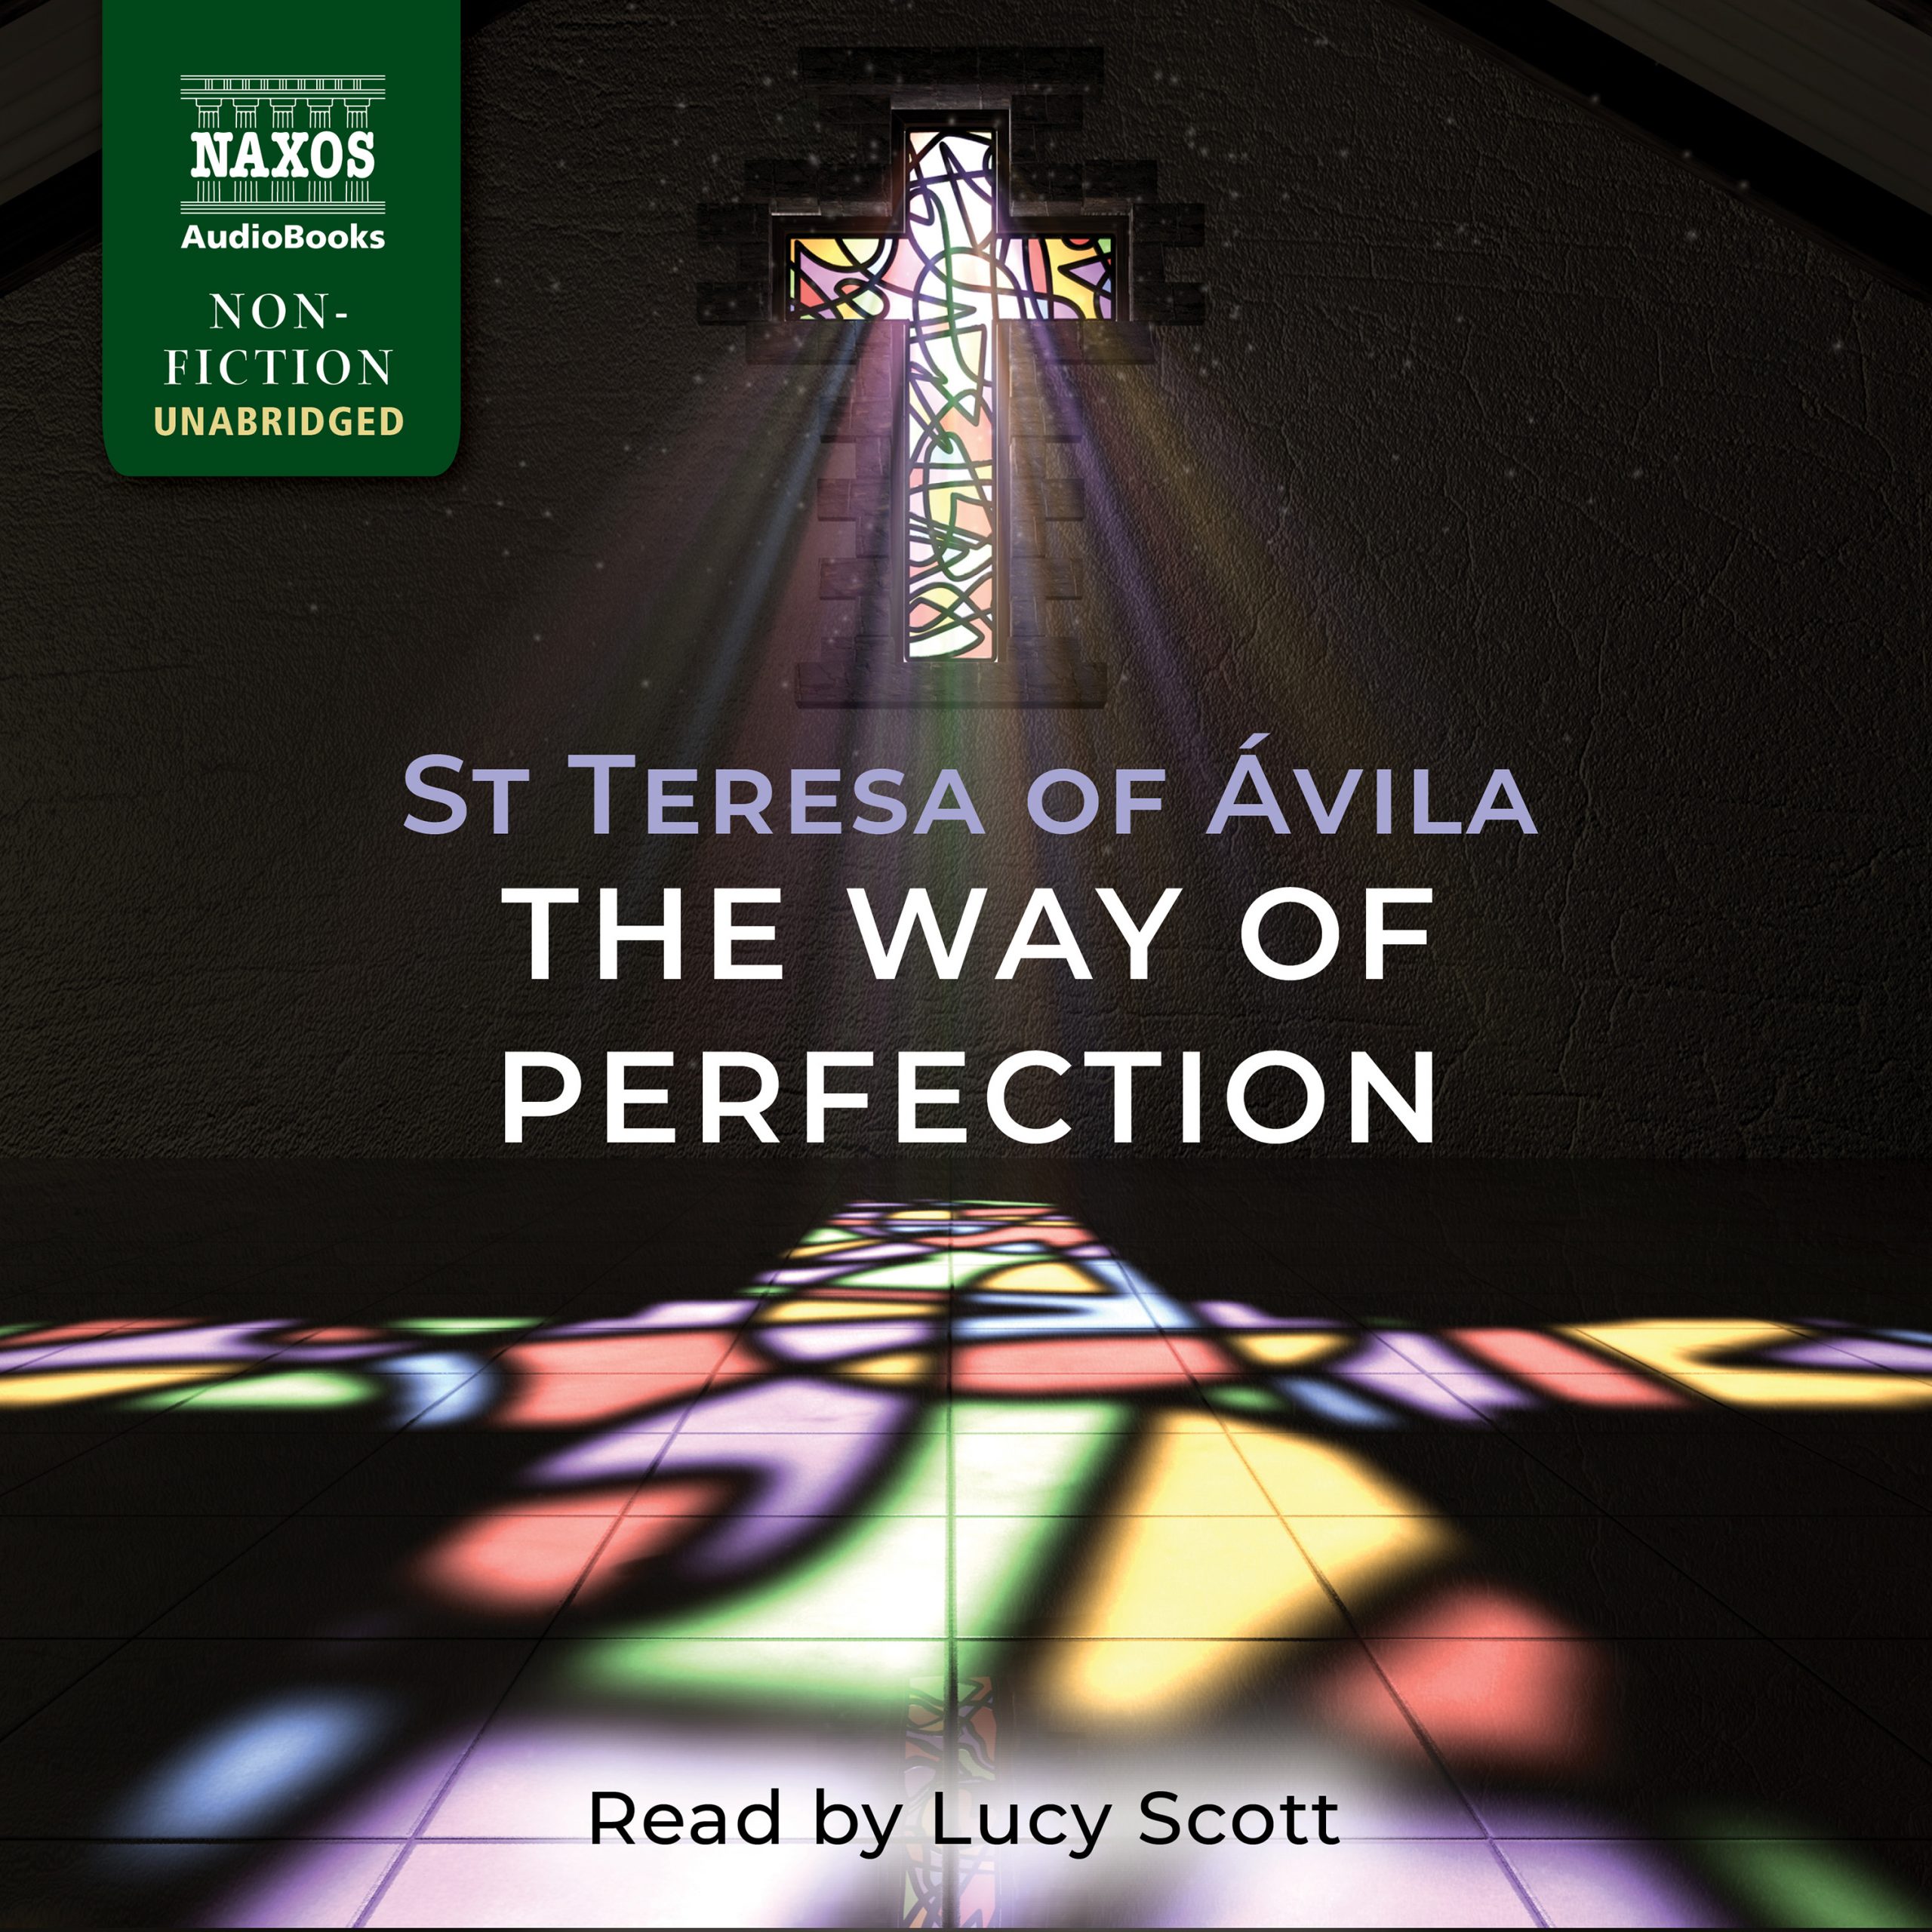 The Way of Perfection (unabridged)